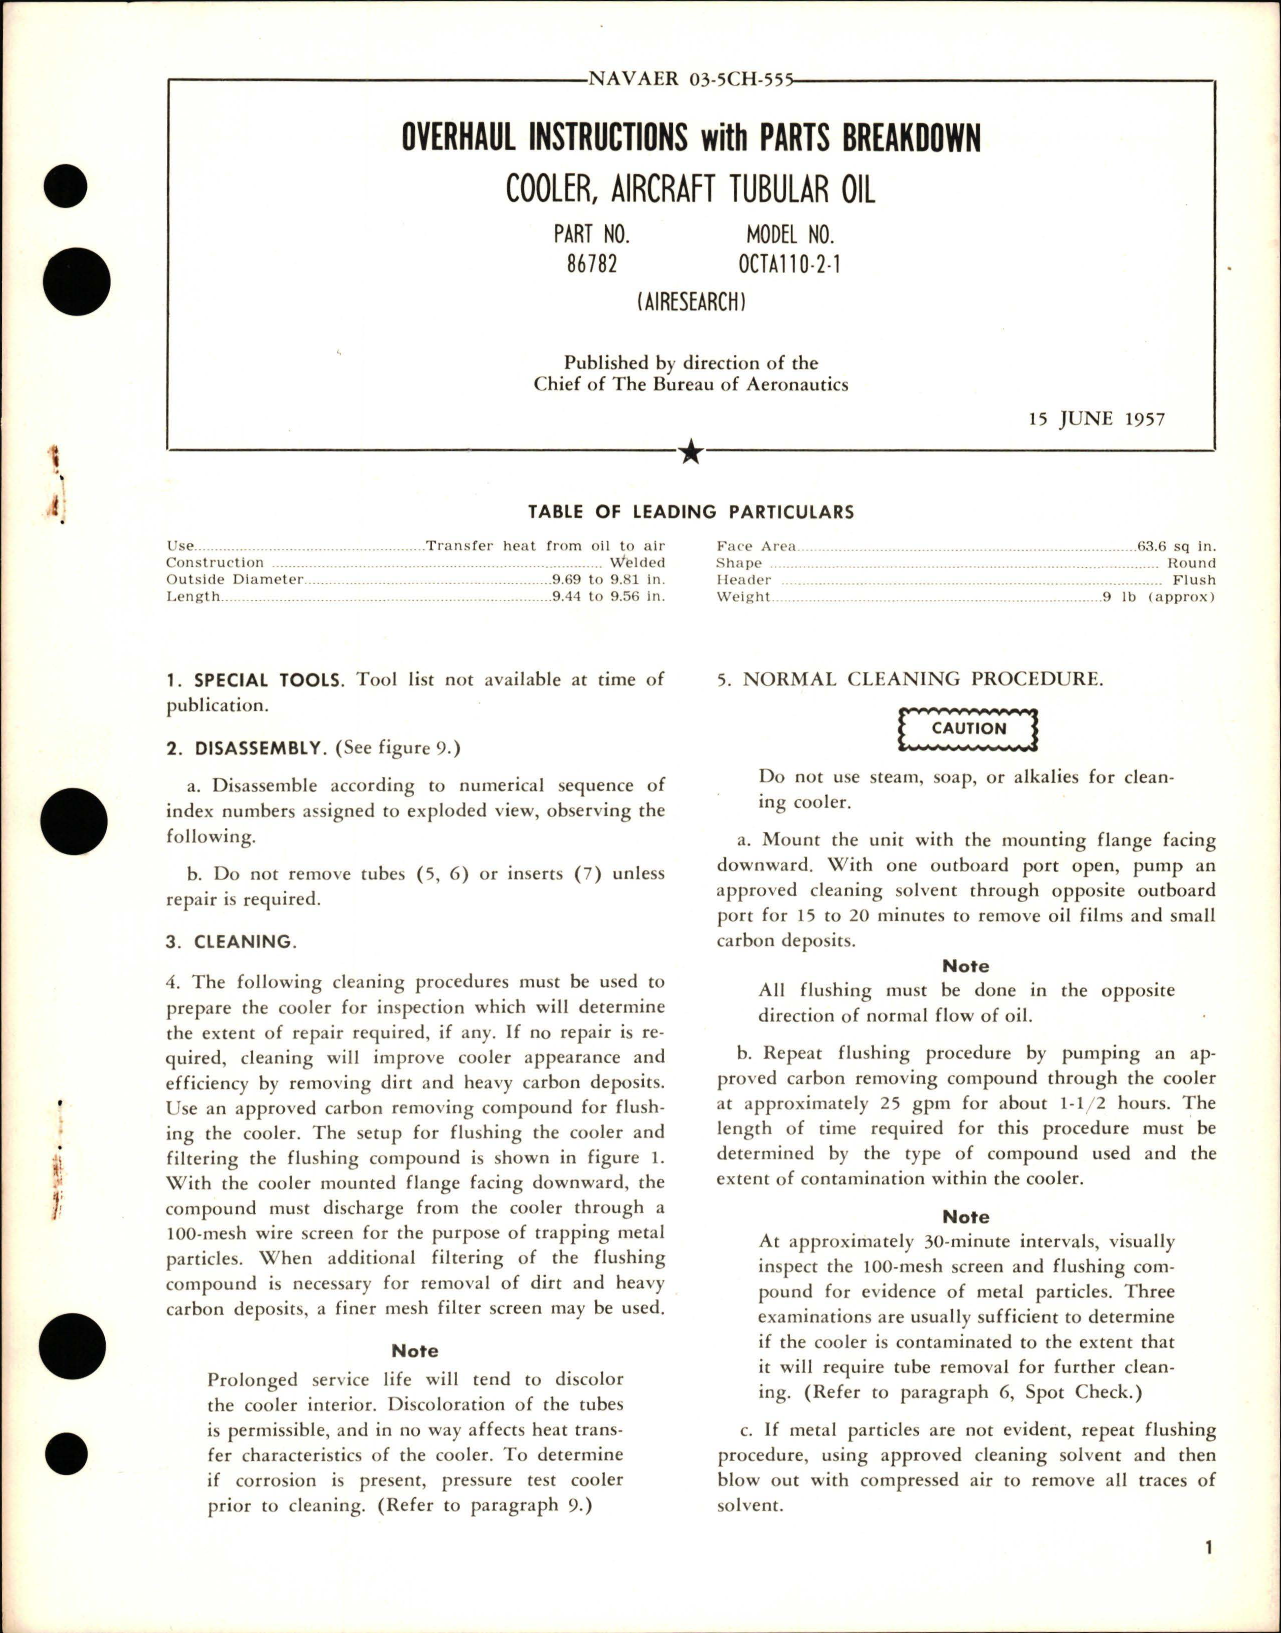 Sample page 1 from AirCorps Library document: Overhaul Instructions with Parts Breakdown for Tubular Oil Cooler - Part 86782 - Model OCTA110-2-1